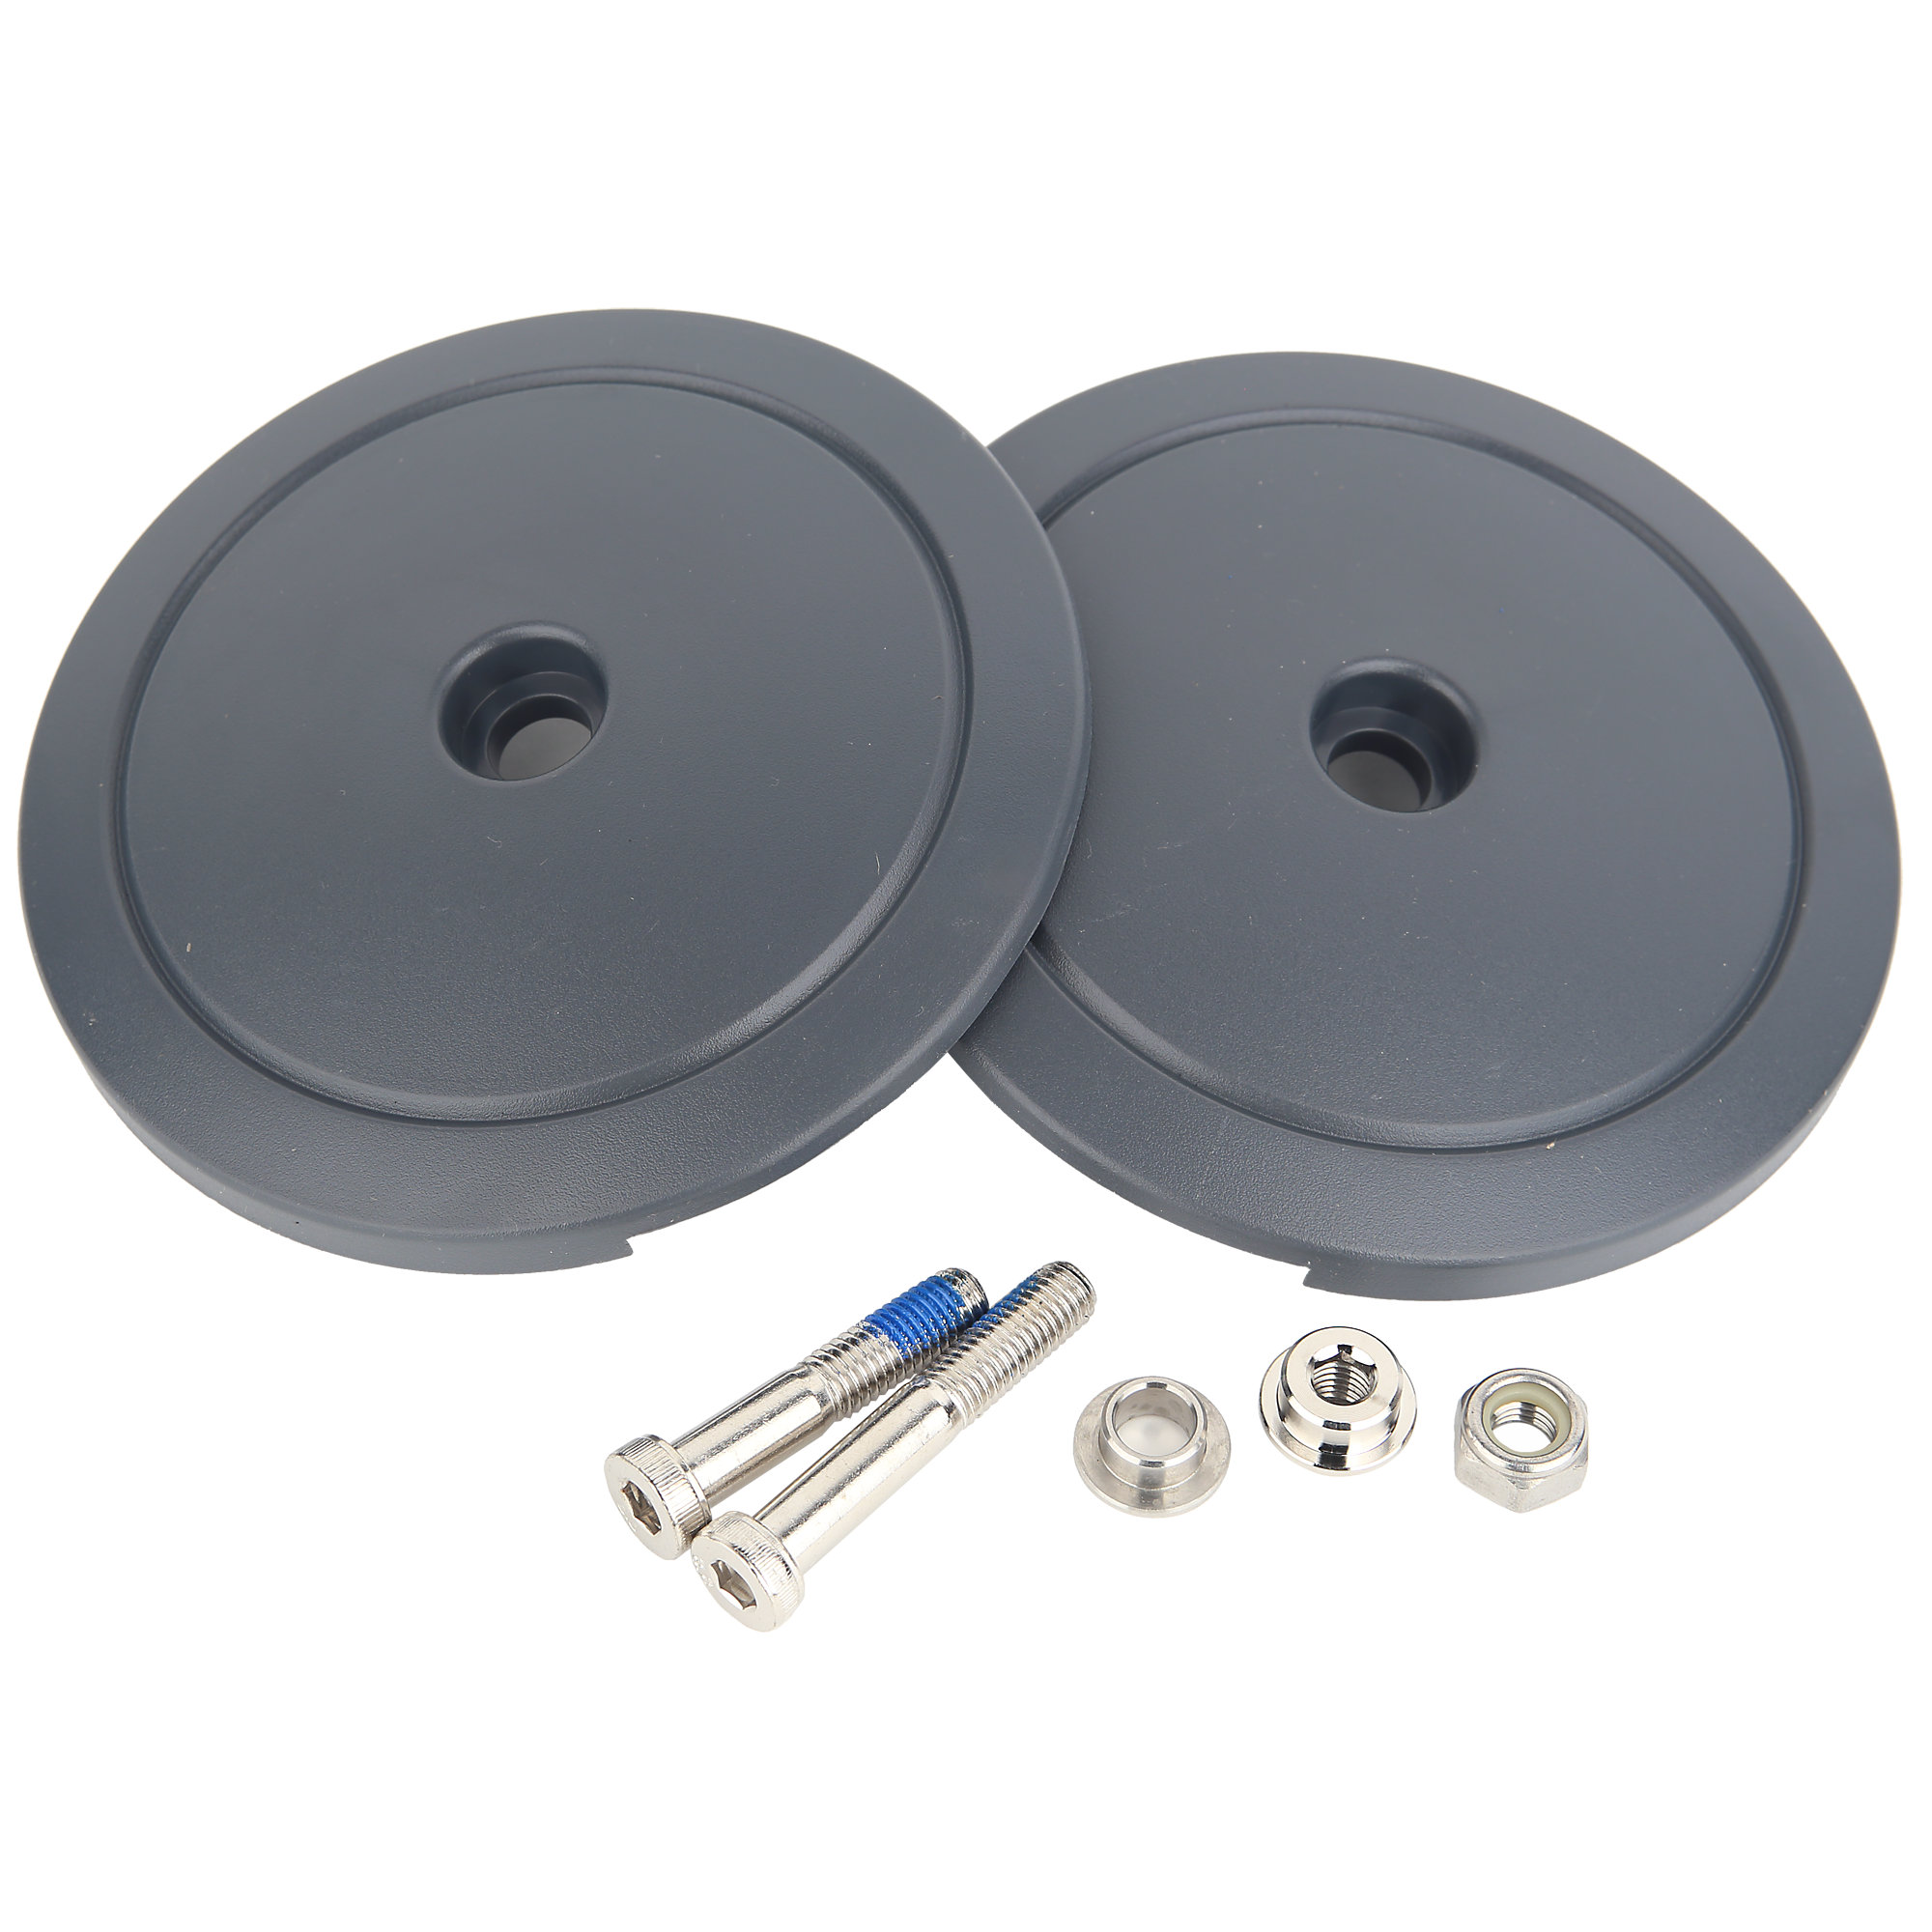 Service Kit, Fz Pulley Cover- Notched, Bolted, LifeFitness